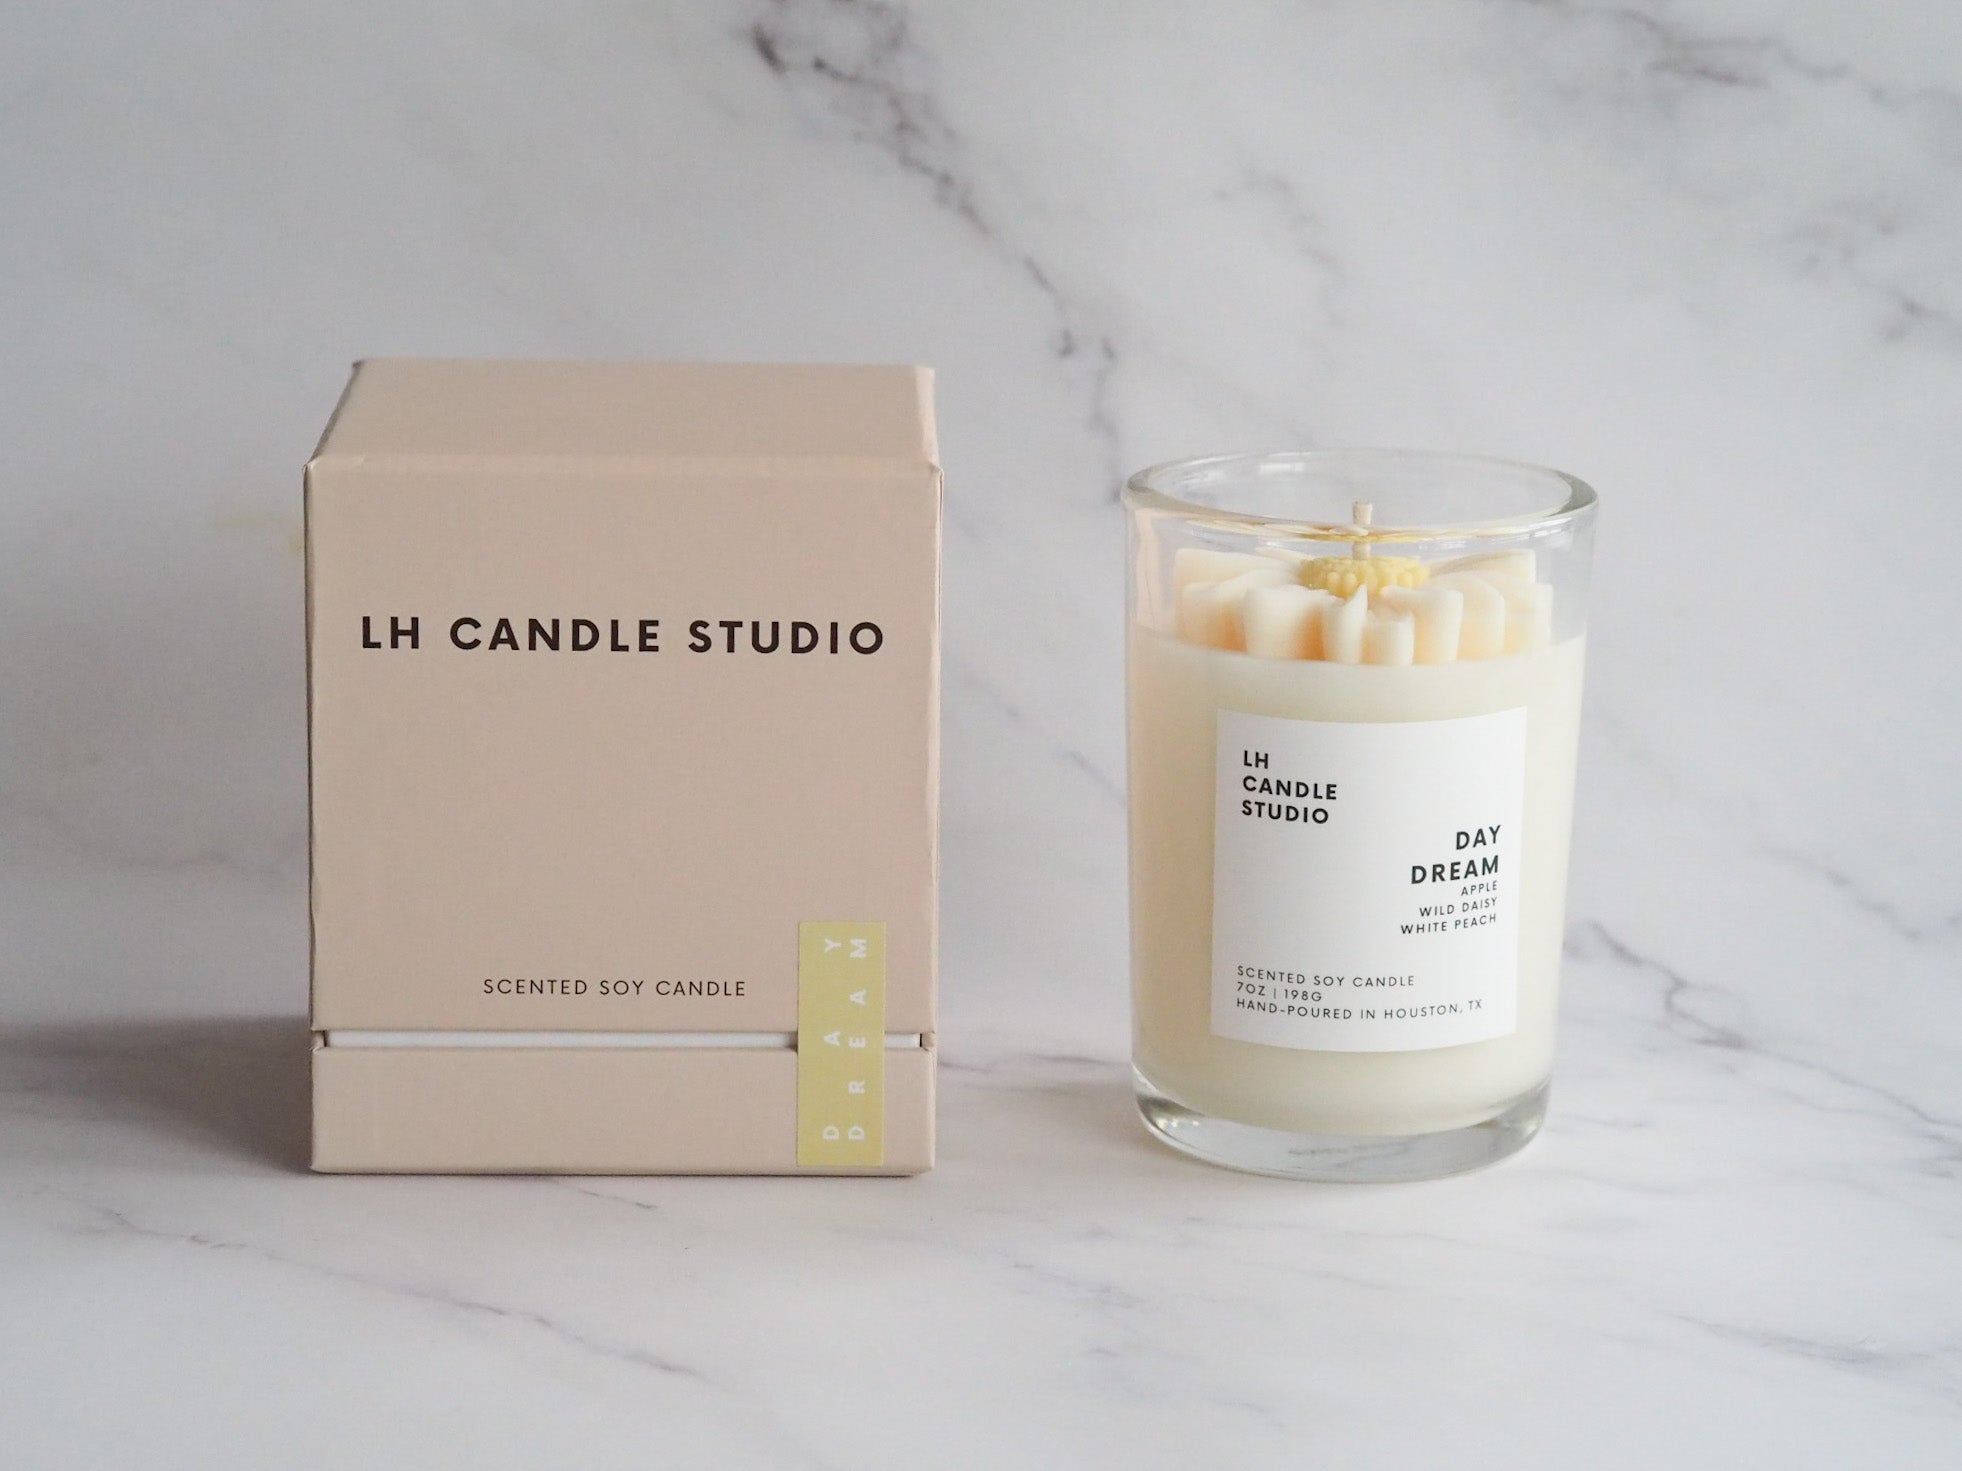 Day Dream Candle - LH CANDLE STUDIO